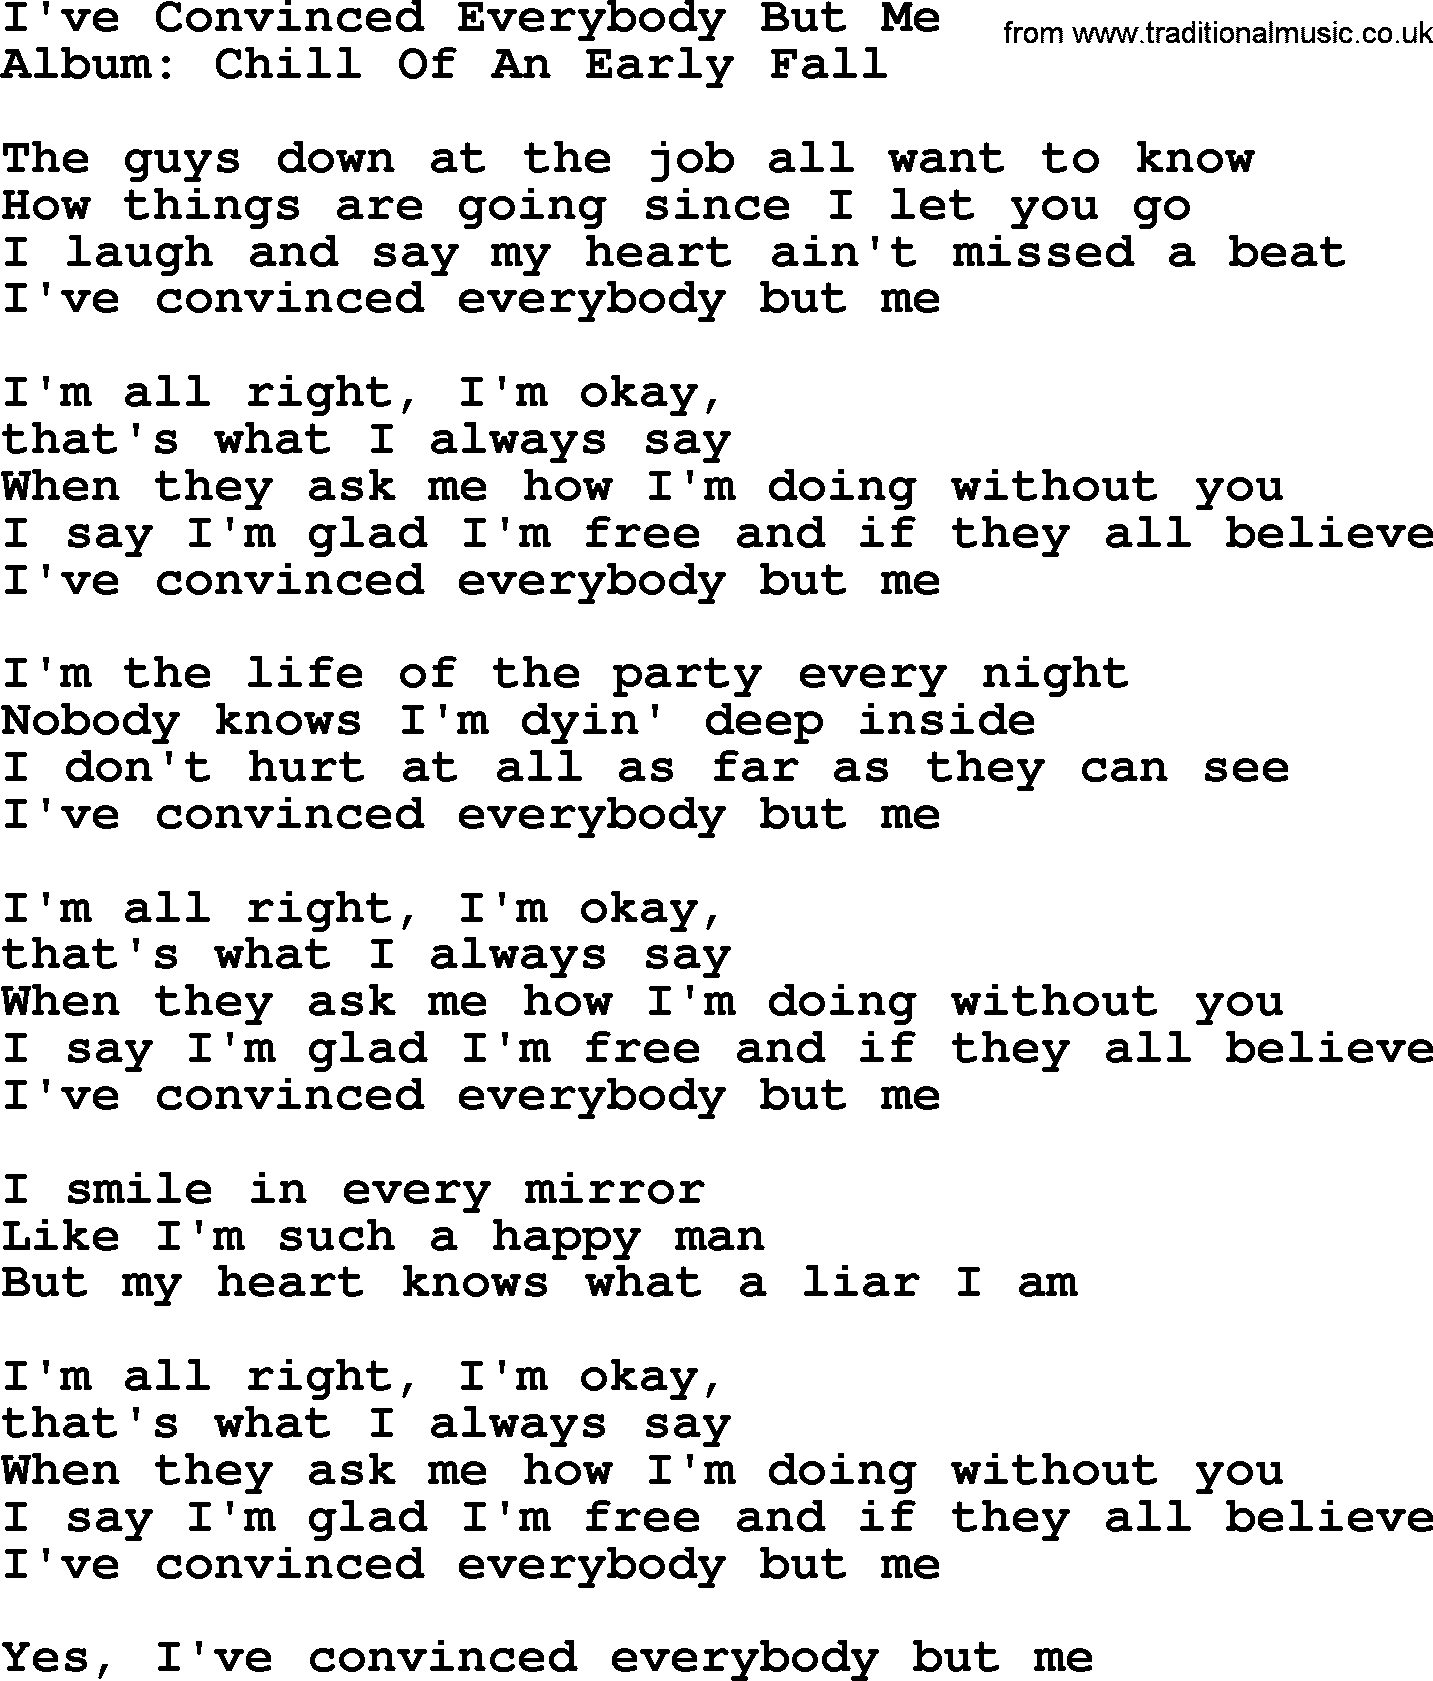 George Strait song: I've Convinced Everybody But Me, lyrics